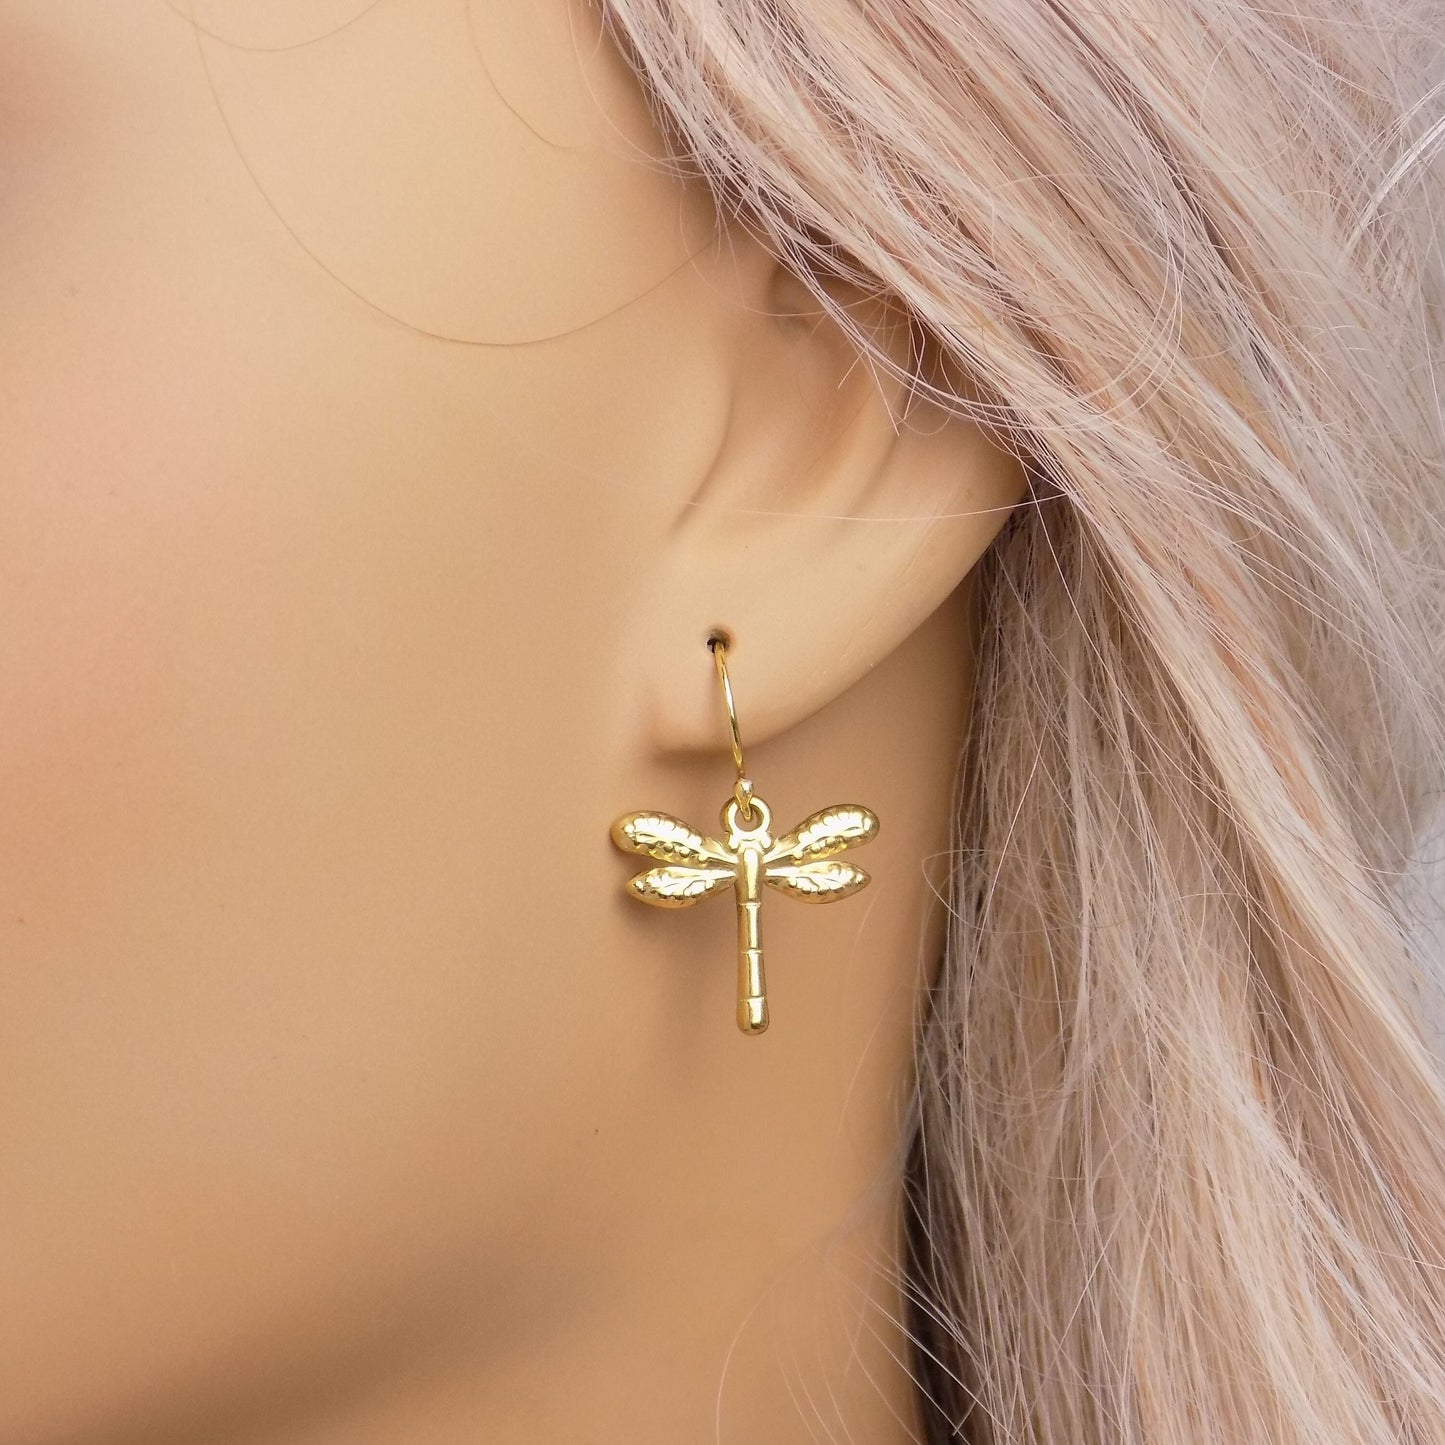 Dragonfly Earrings Gold, Charm Dangle Earring, Unique Jewelry, Gift For Her, M7-331